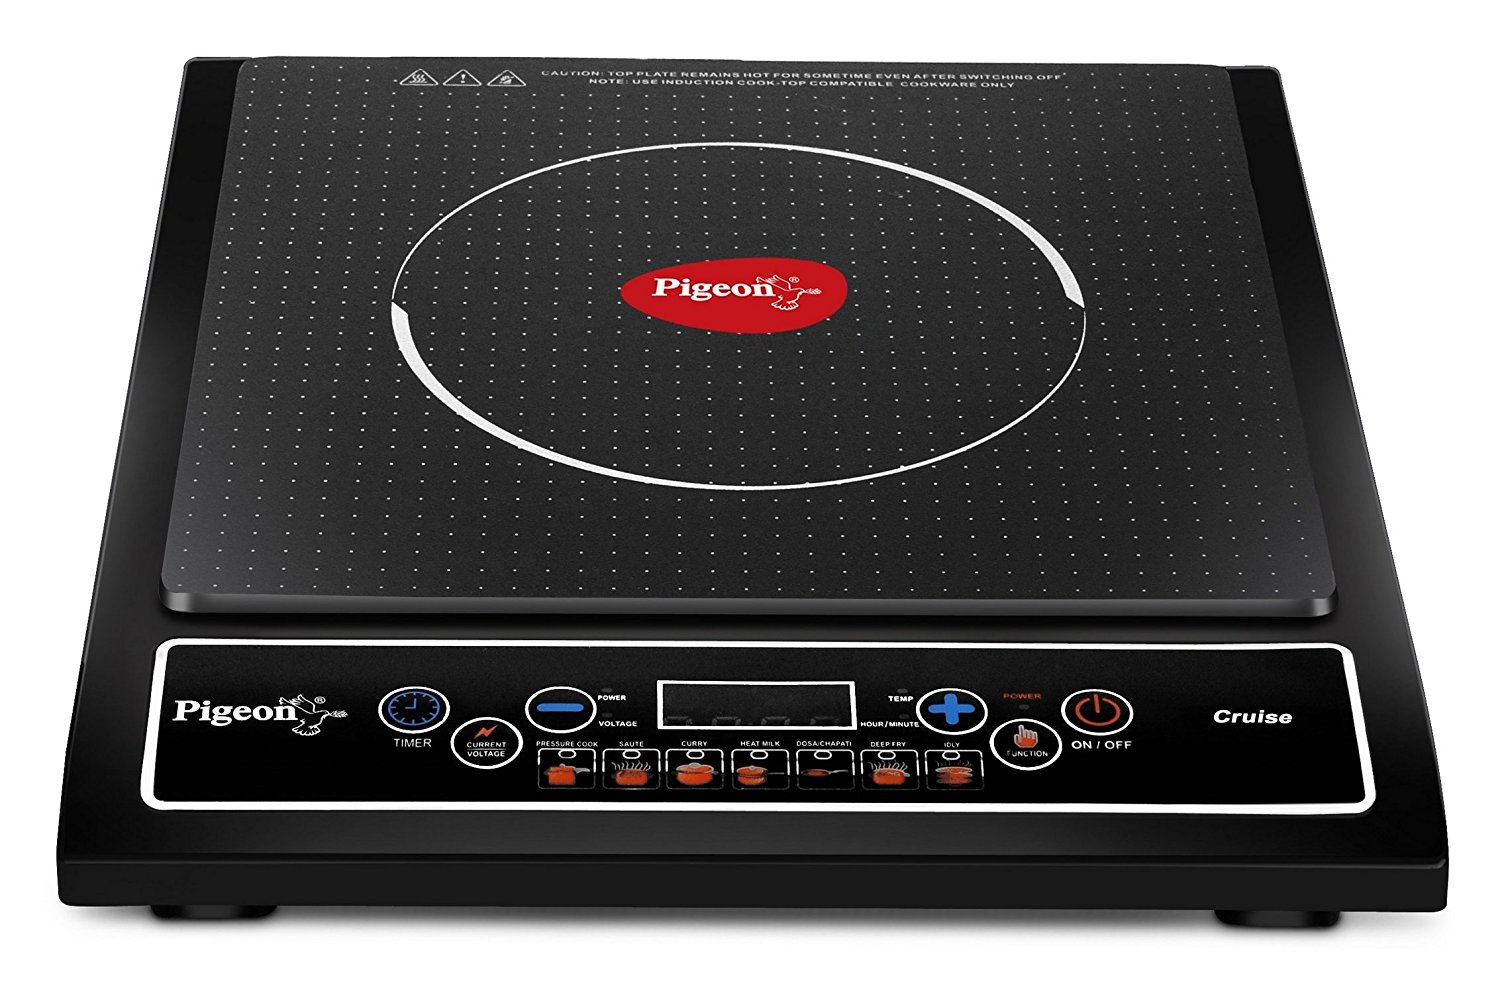 Amazon: Buy Pigeon Cruise 1800-Watt Induction Cooktop (Black) at Rs 1249 only